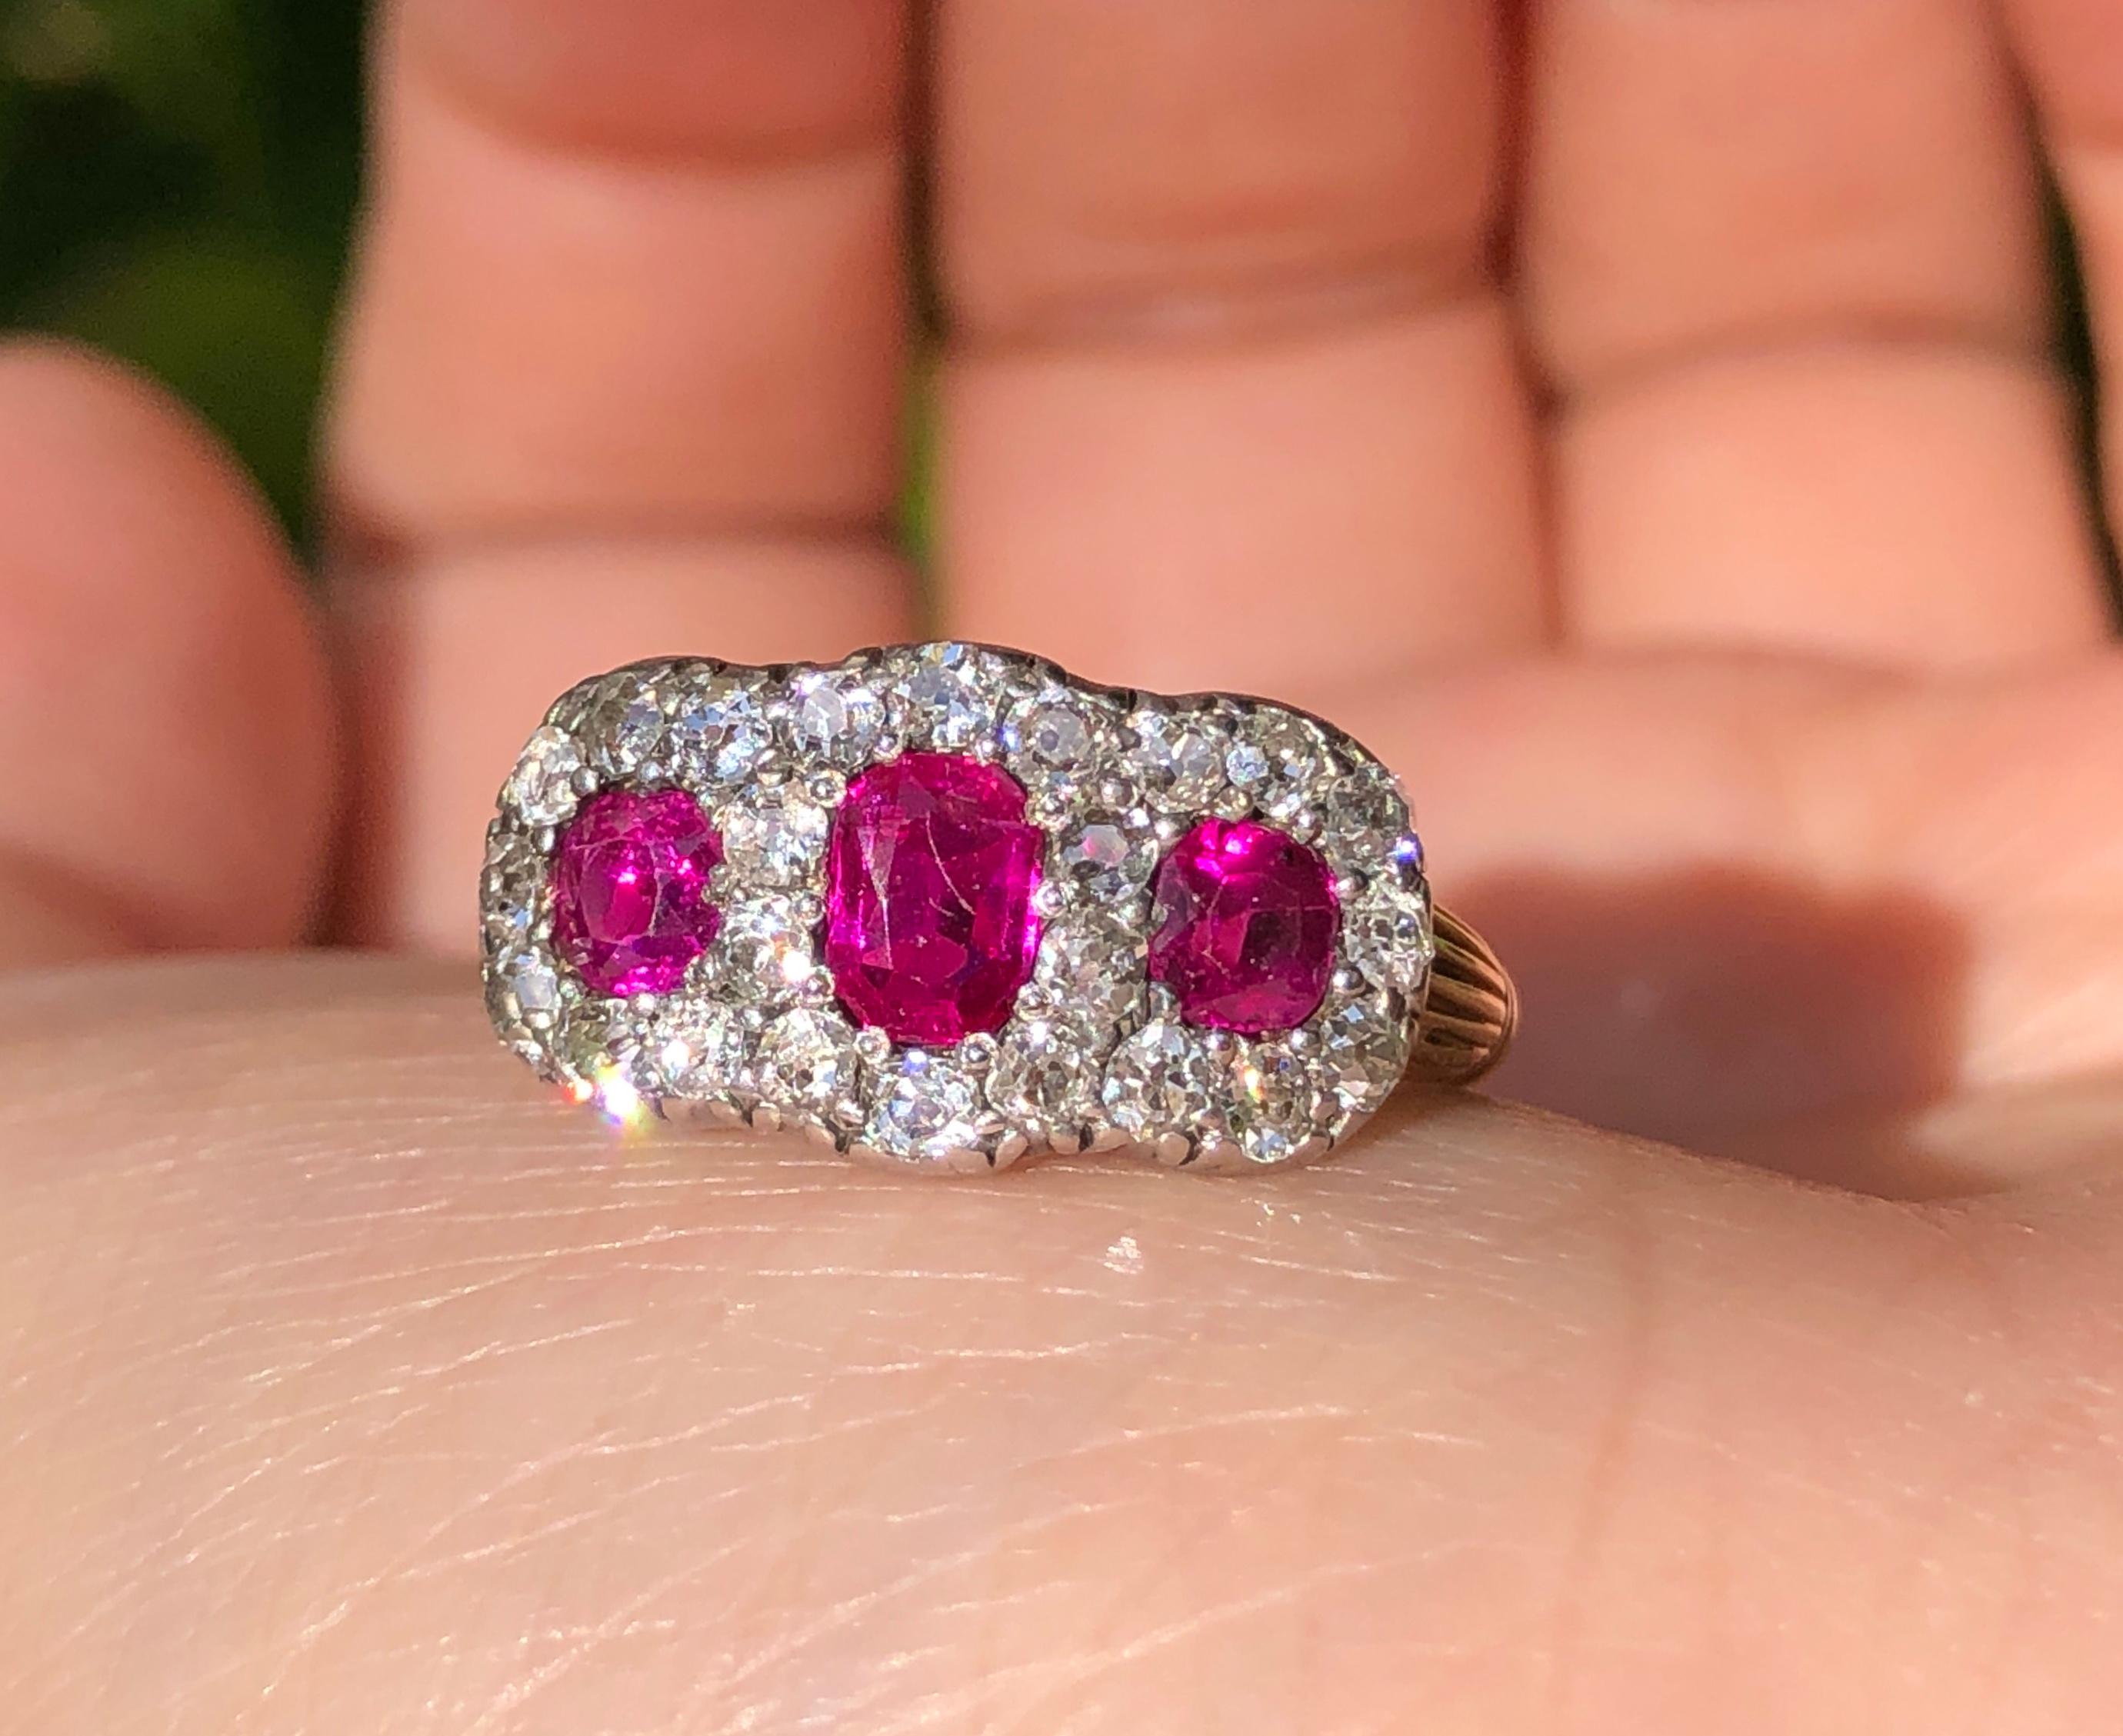 This is a very fine Victorian triple cluster ruby diamond ring. A gold and silver ring horizontally set with three oval old mine rubies in gold bead settings with an approximate total weight of 1.5 carats, encircled by cushion shaped old mine